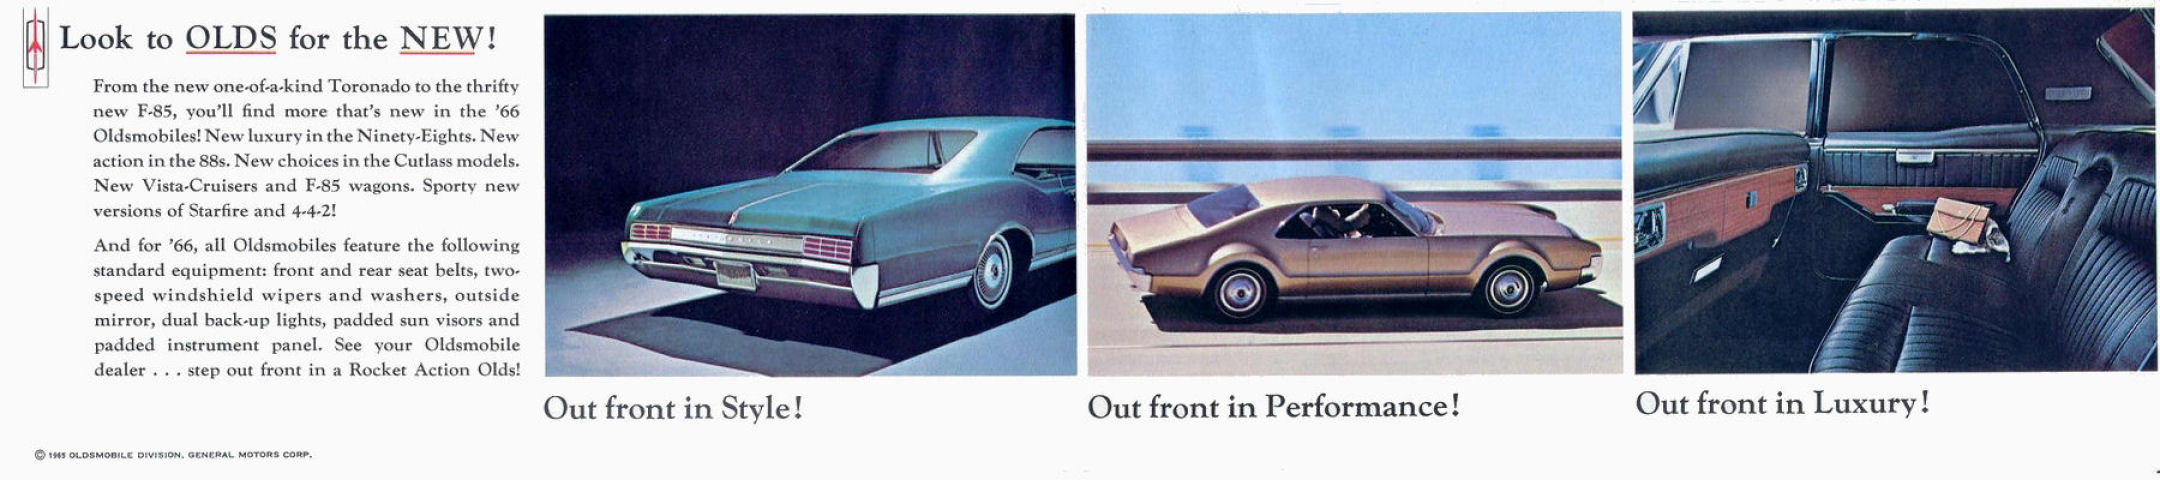 1966 Oldsmobile Motor Cars Foldout Page 1